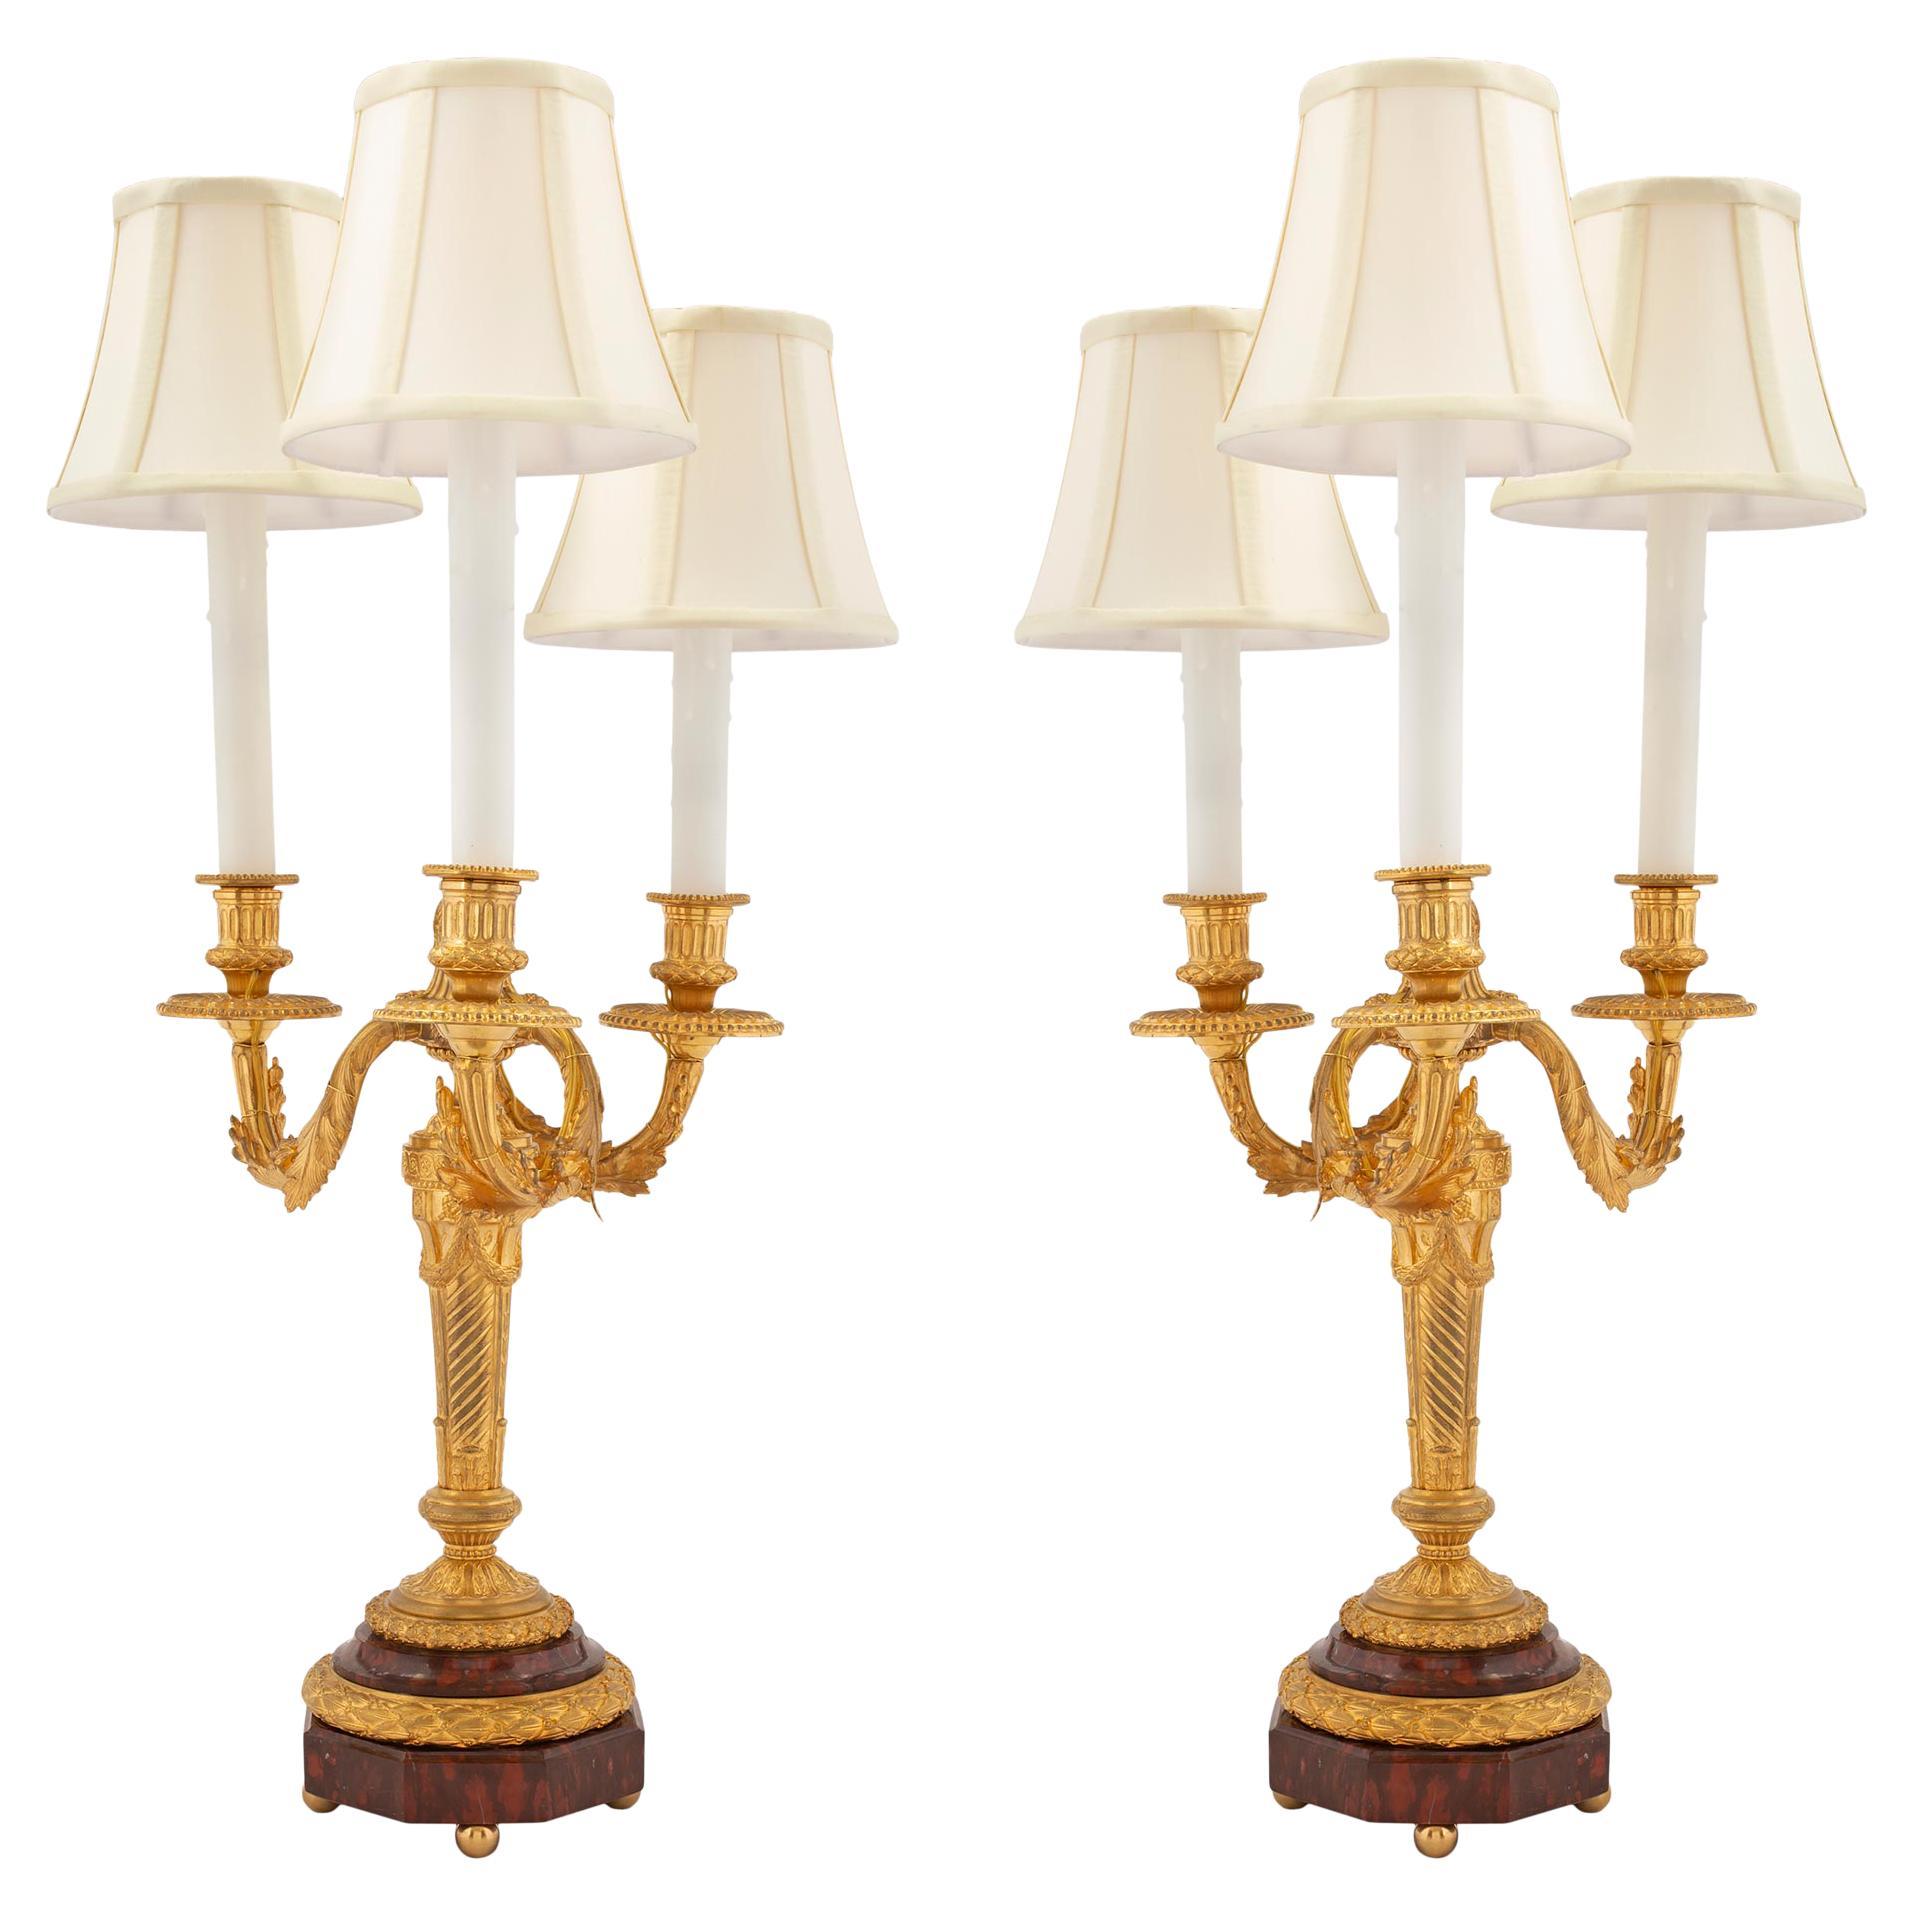 Pair of French 19th Century Louis XVI Style Ormolu and Marble Candelabras Lamps For Sale